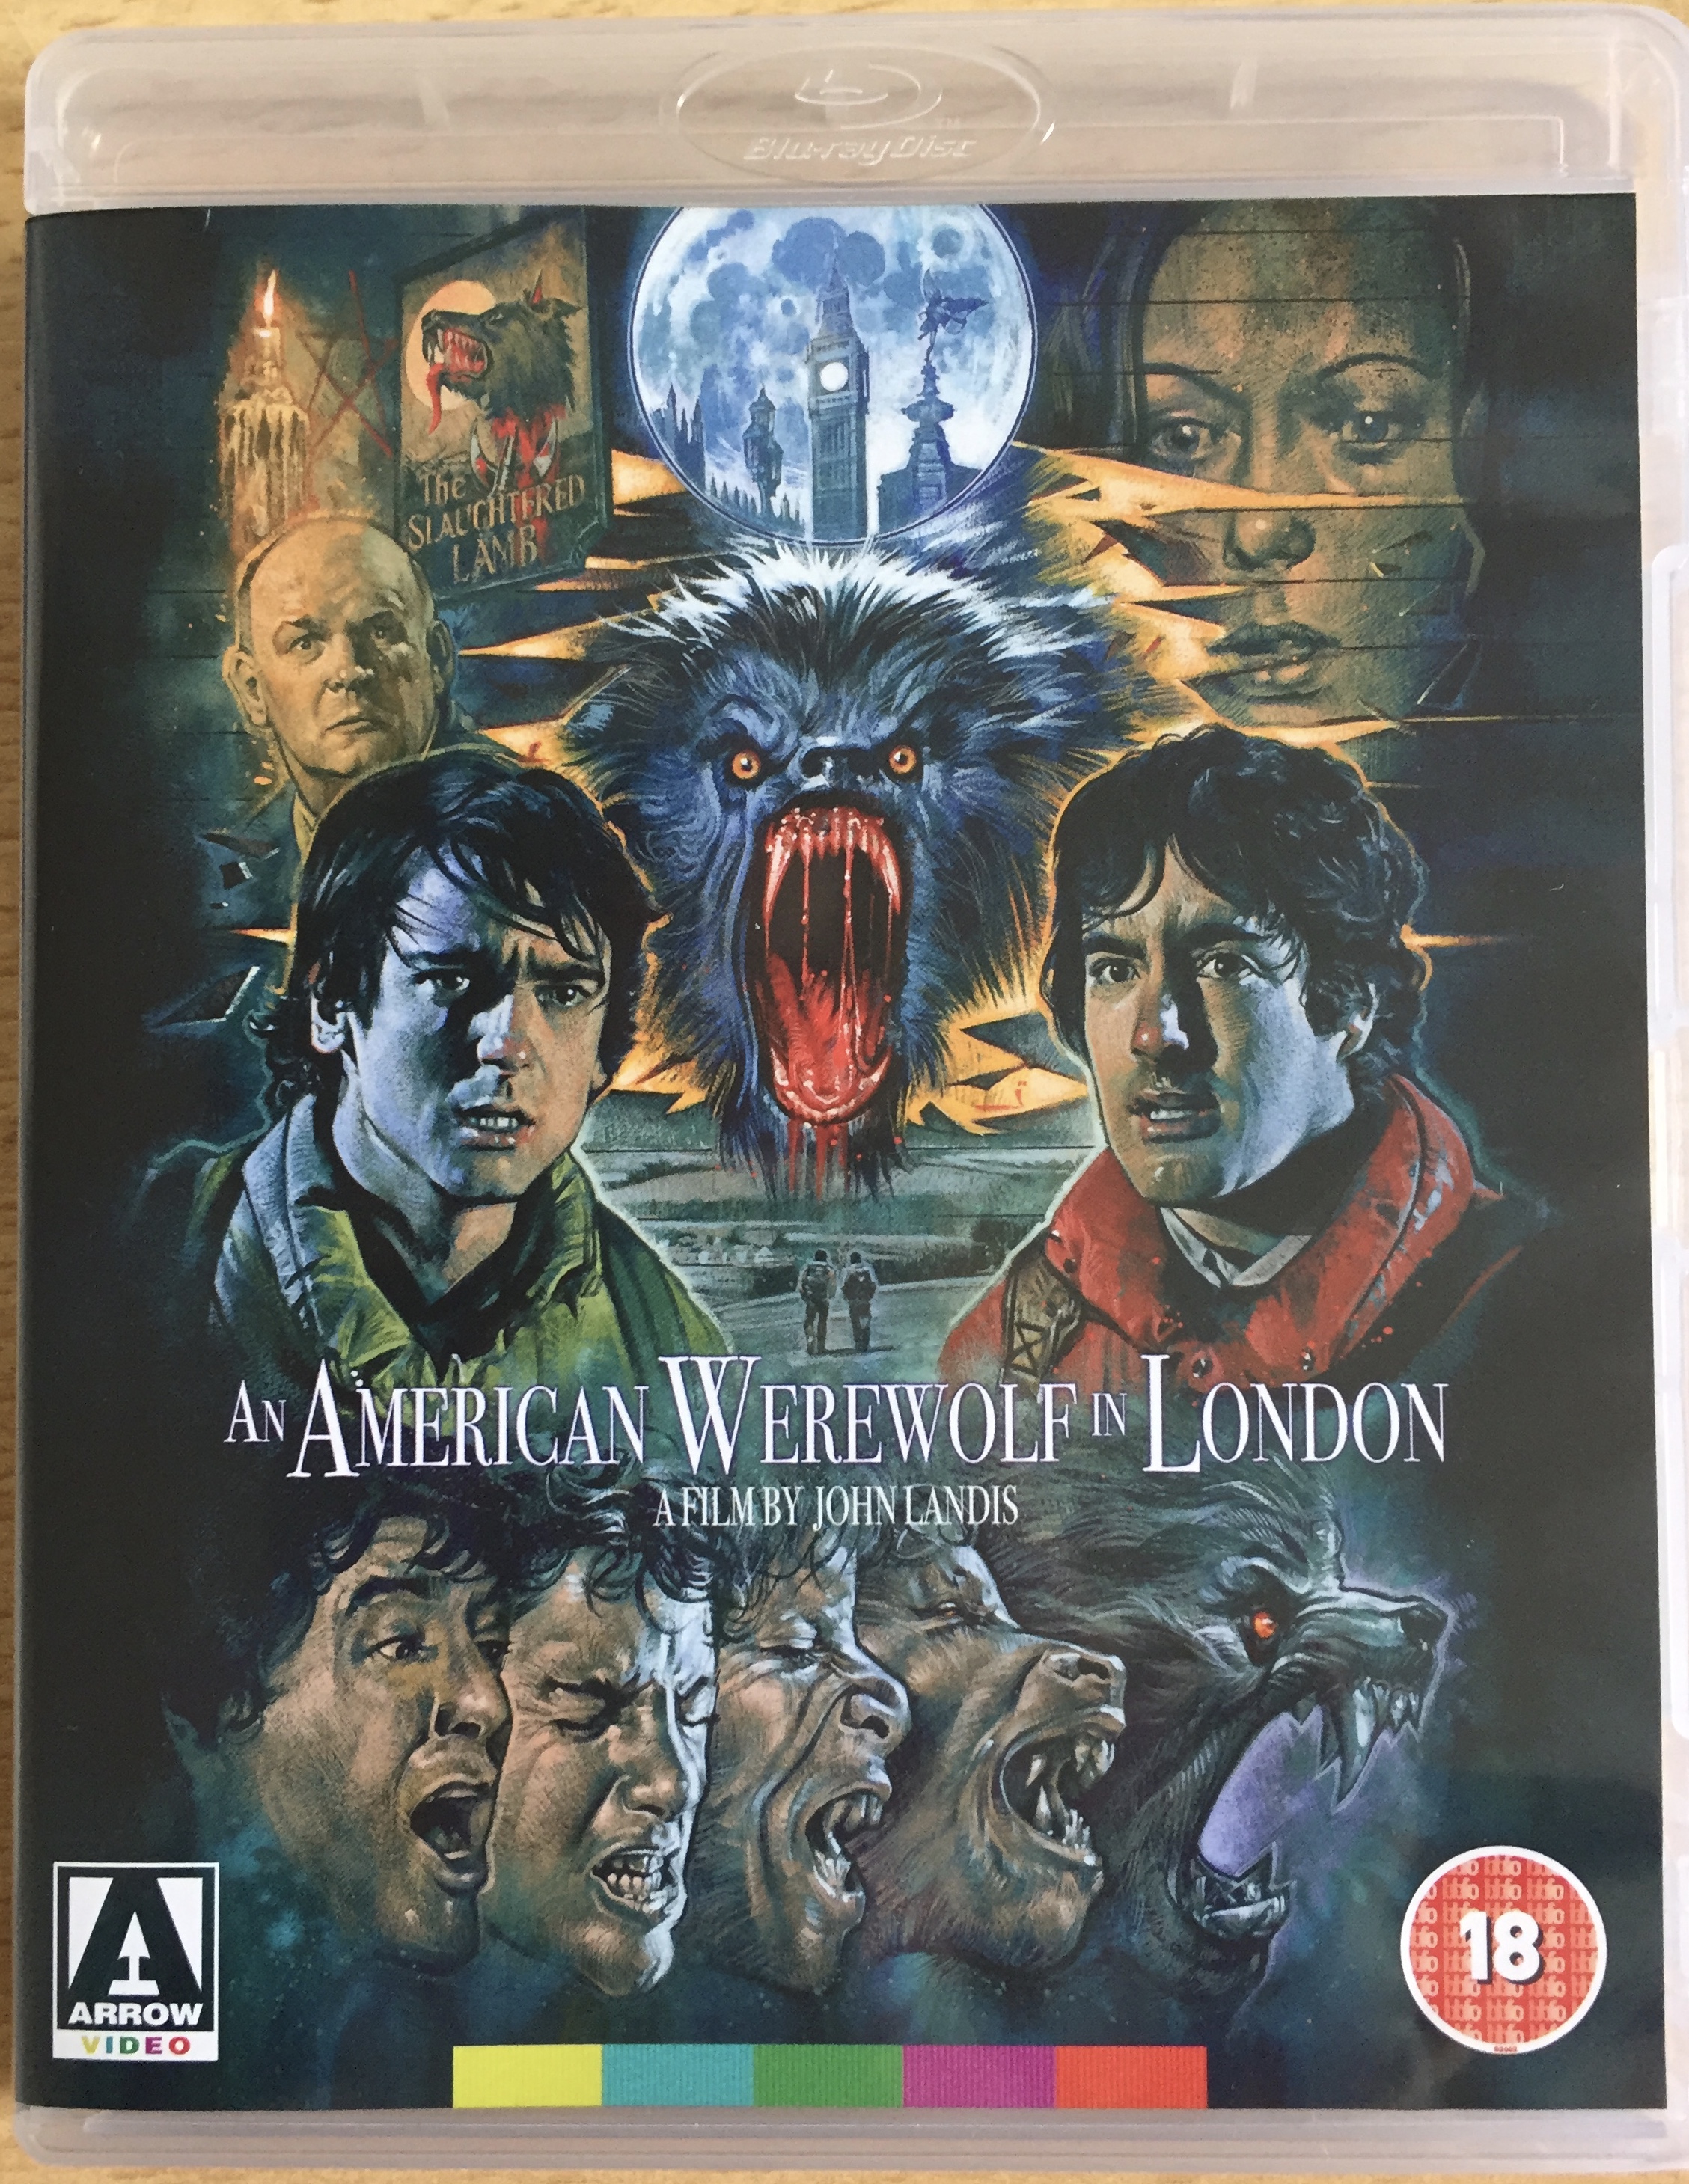 Blu-ray cover for An American Werewolf In London, featuring a colourful painting showing the head of a roaring werewolf surrounded by headshots of the film's main characters. At the bottom, a sequence of 5 headshots illustrates the transformation from human to werewolf.